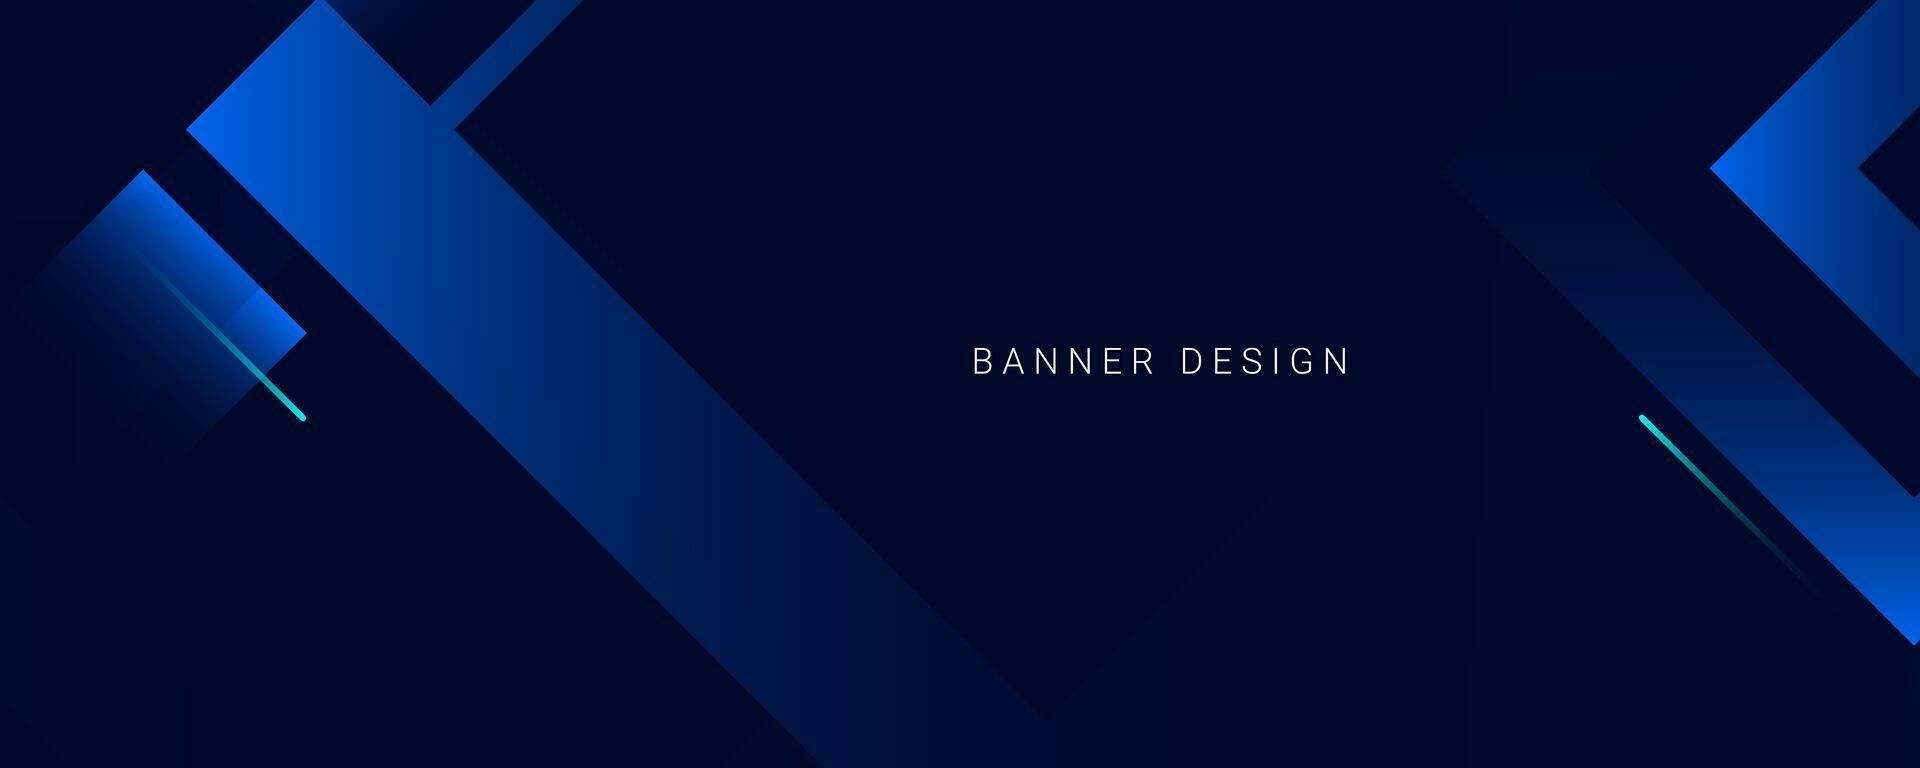 Abstract geometric elegant modern pattern colorful banner background vector